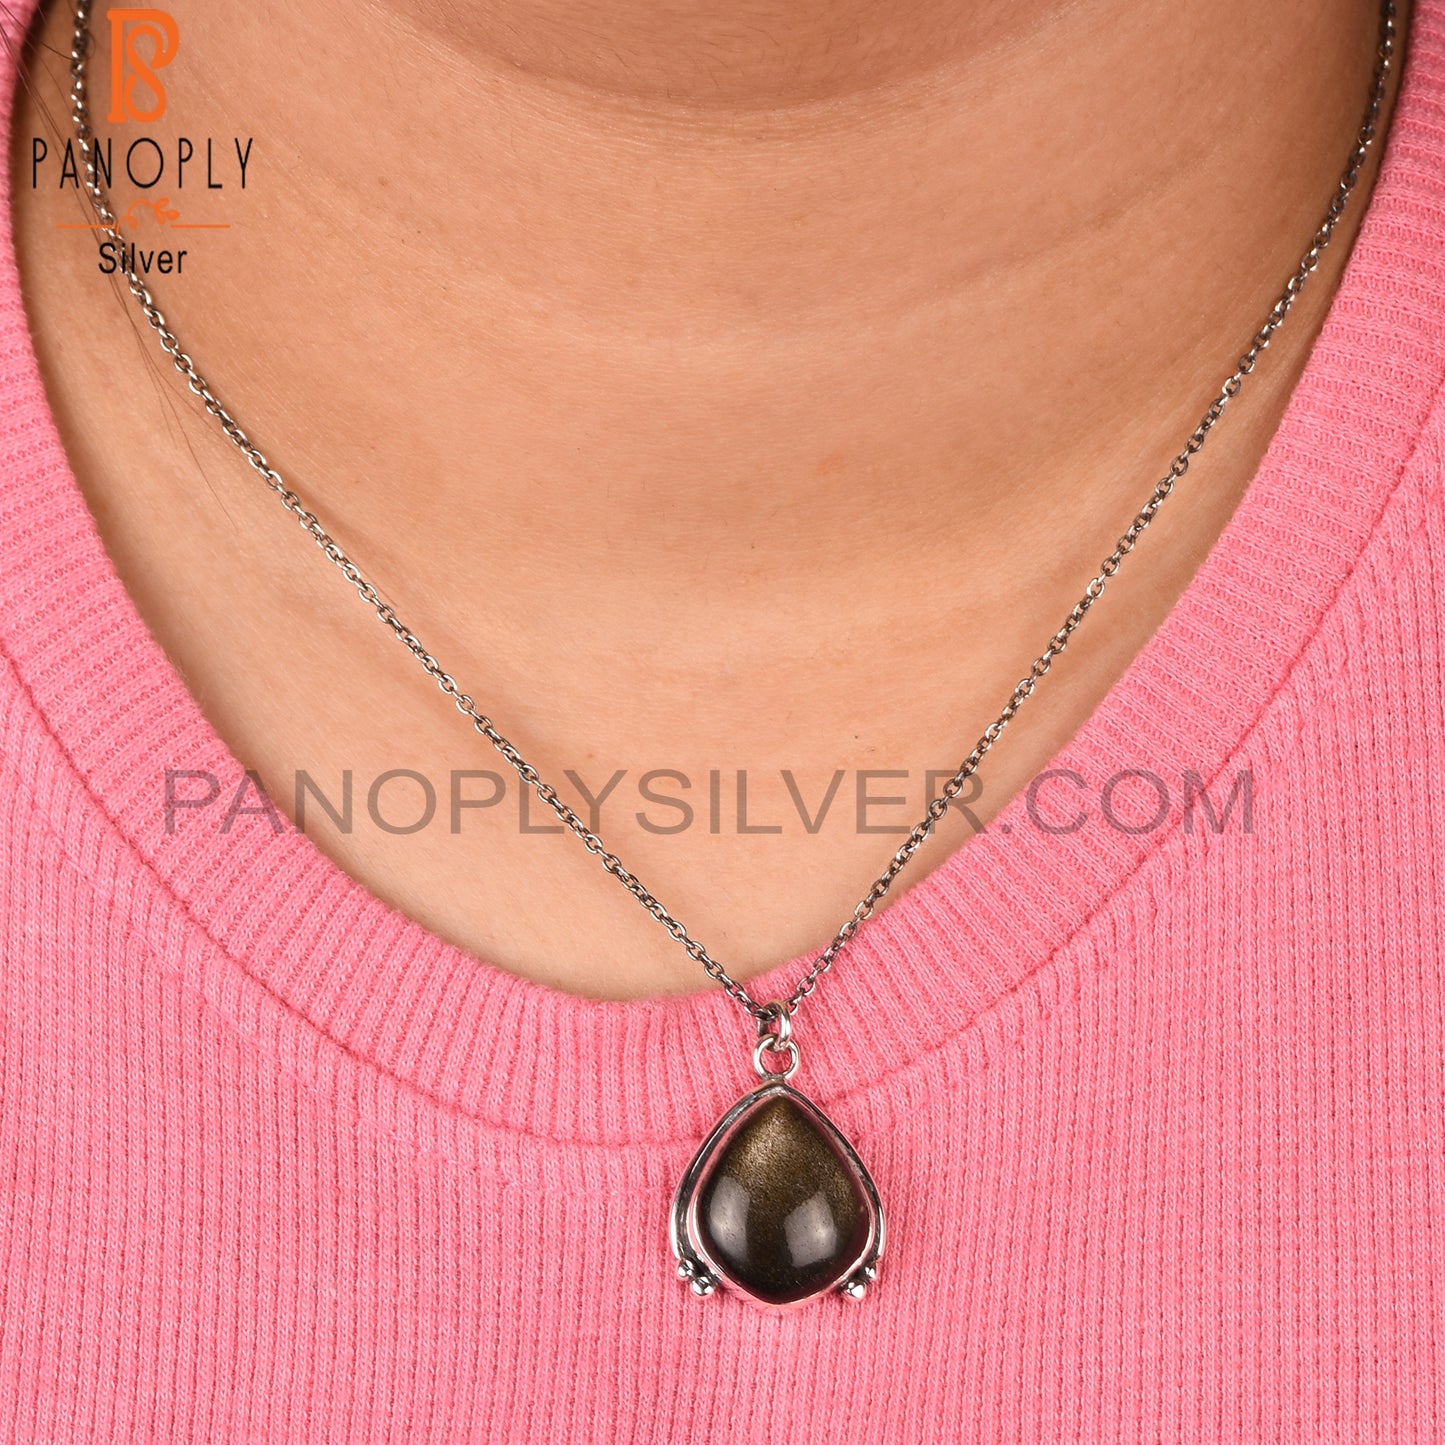 Gold Sheen Obsidian 925 Sterling Silver Pendant Necklace